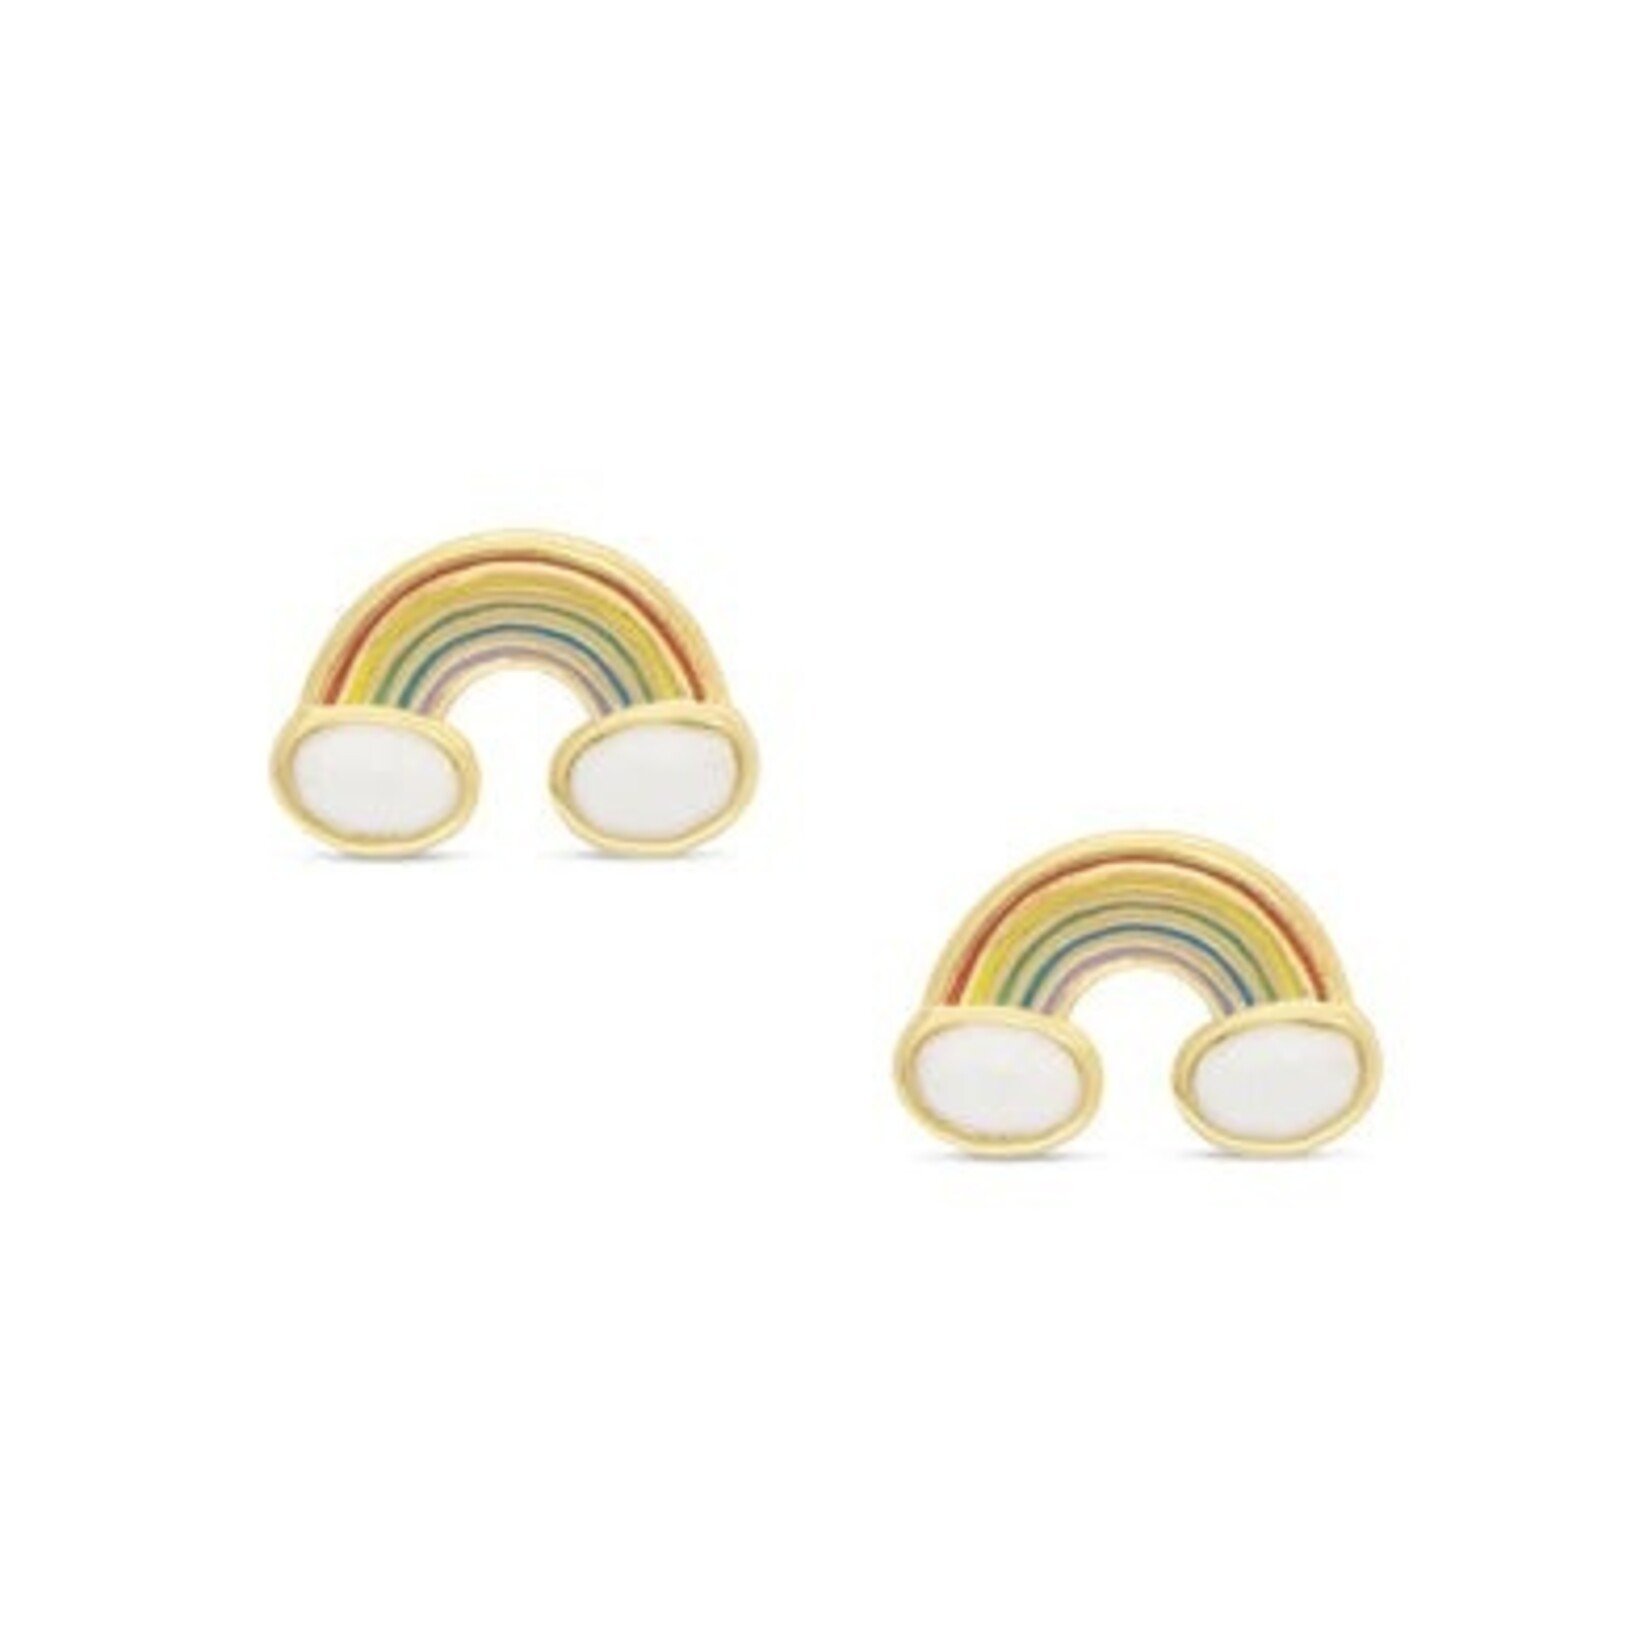 Lily Nily Rainbow Gold Earings